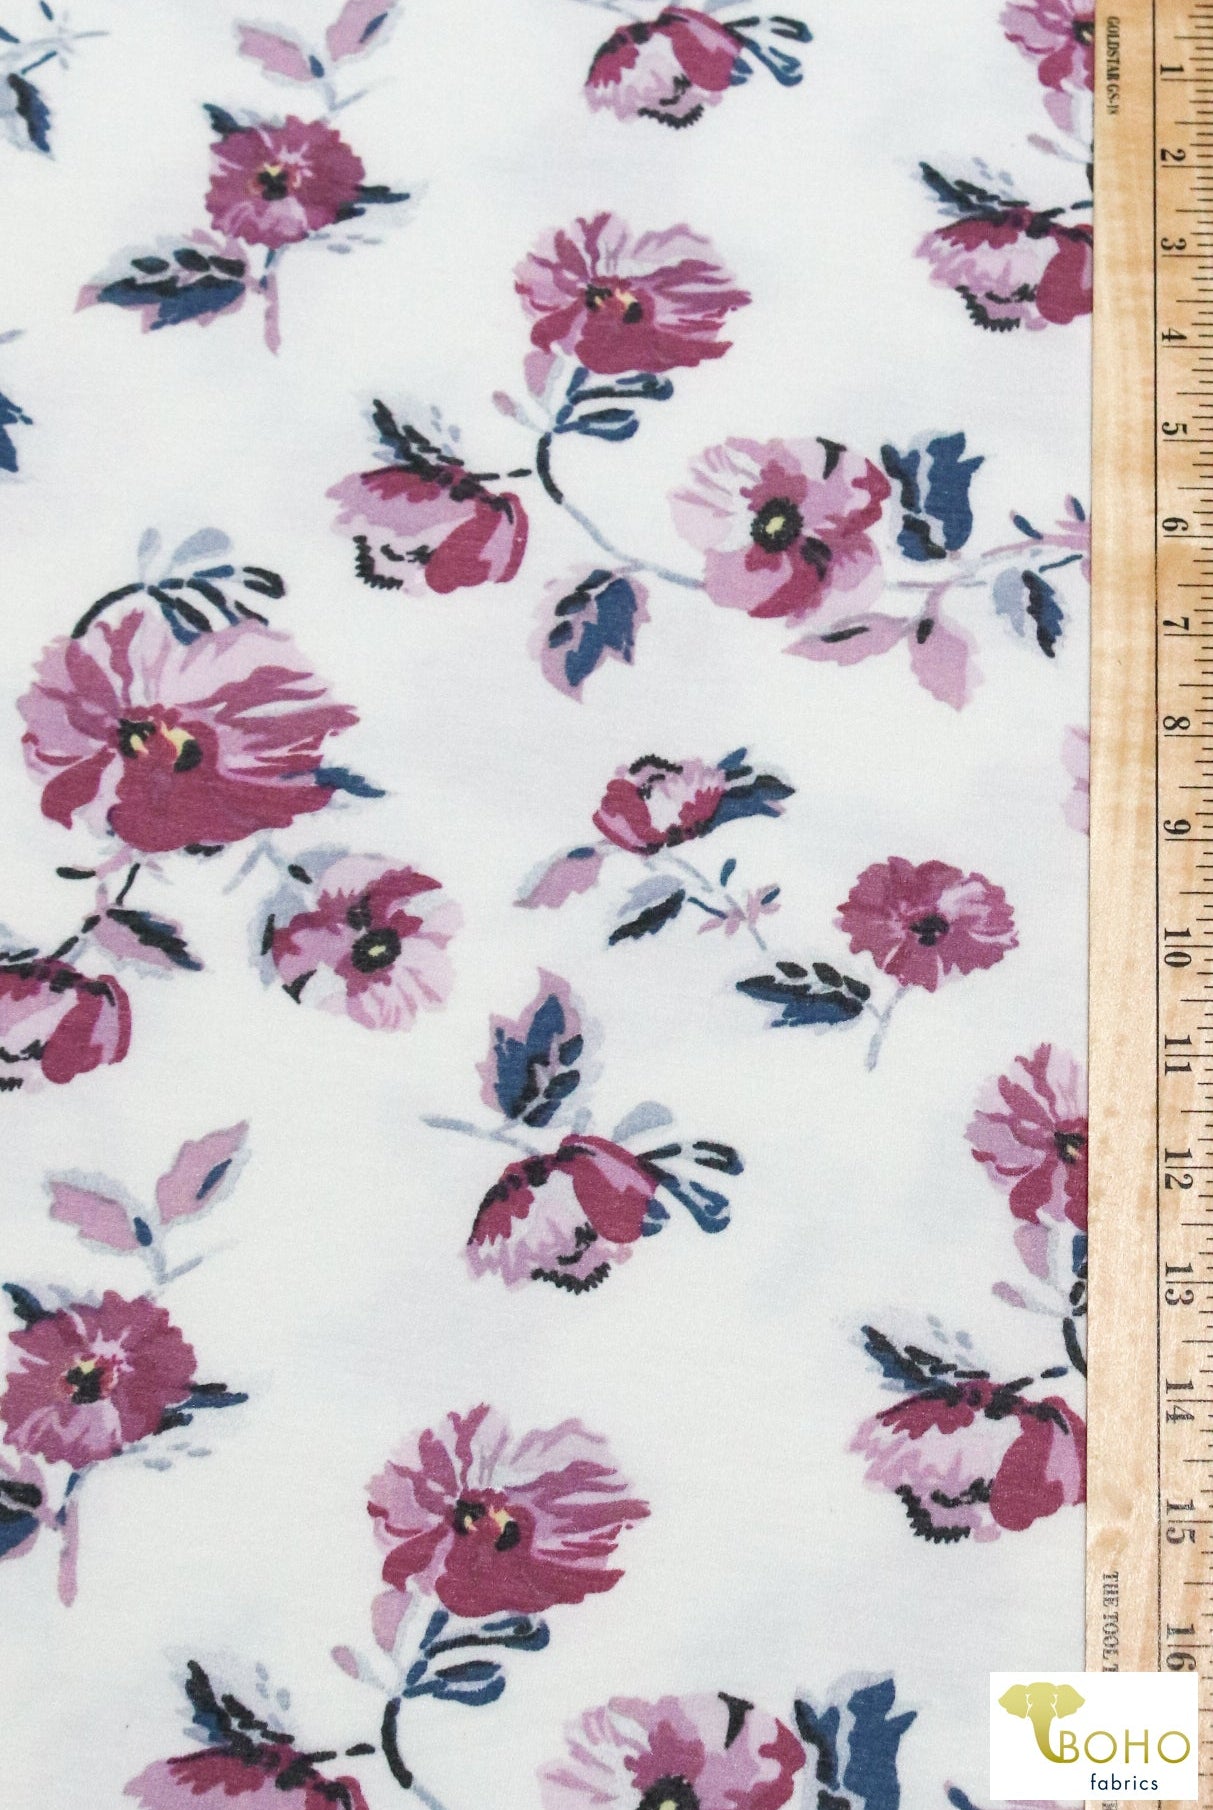 Lilac Cosmos on White, French Terry Knit Print. FTP-330-PURP - Boho Fabrics